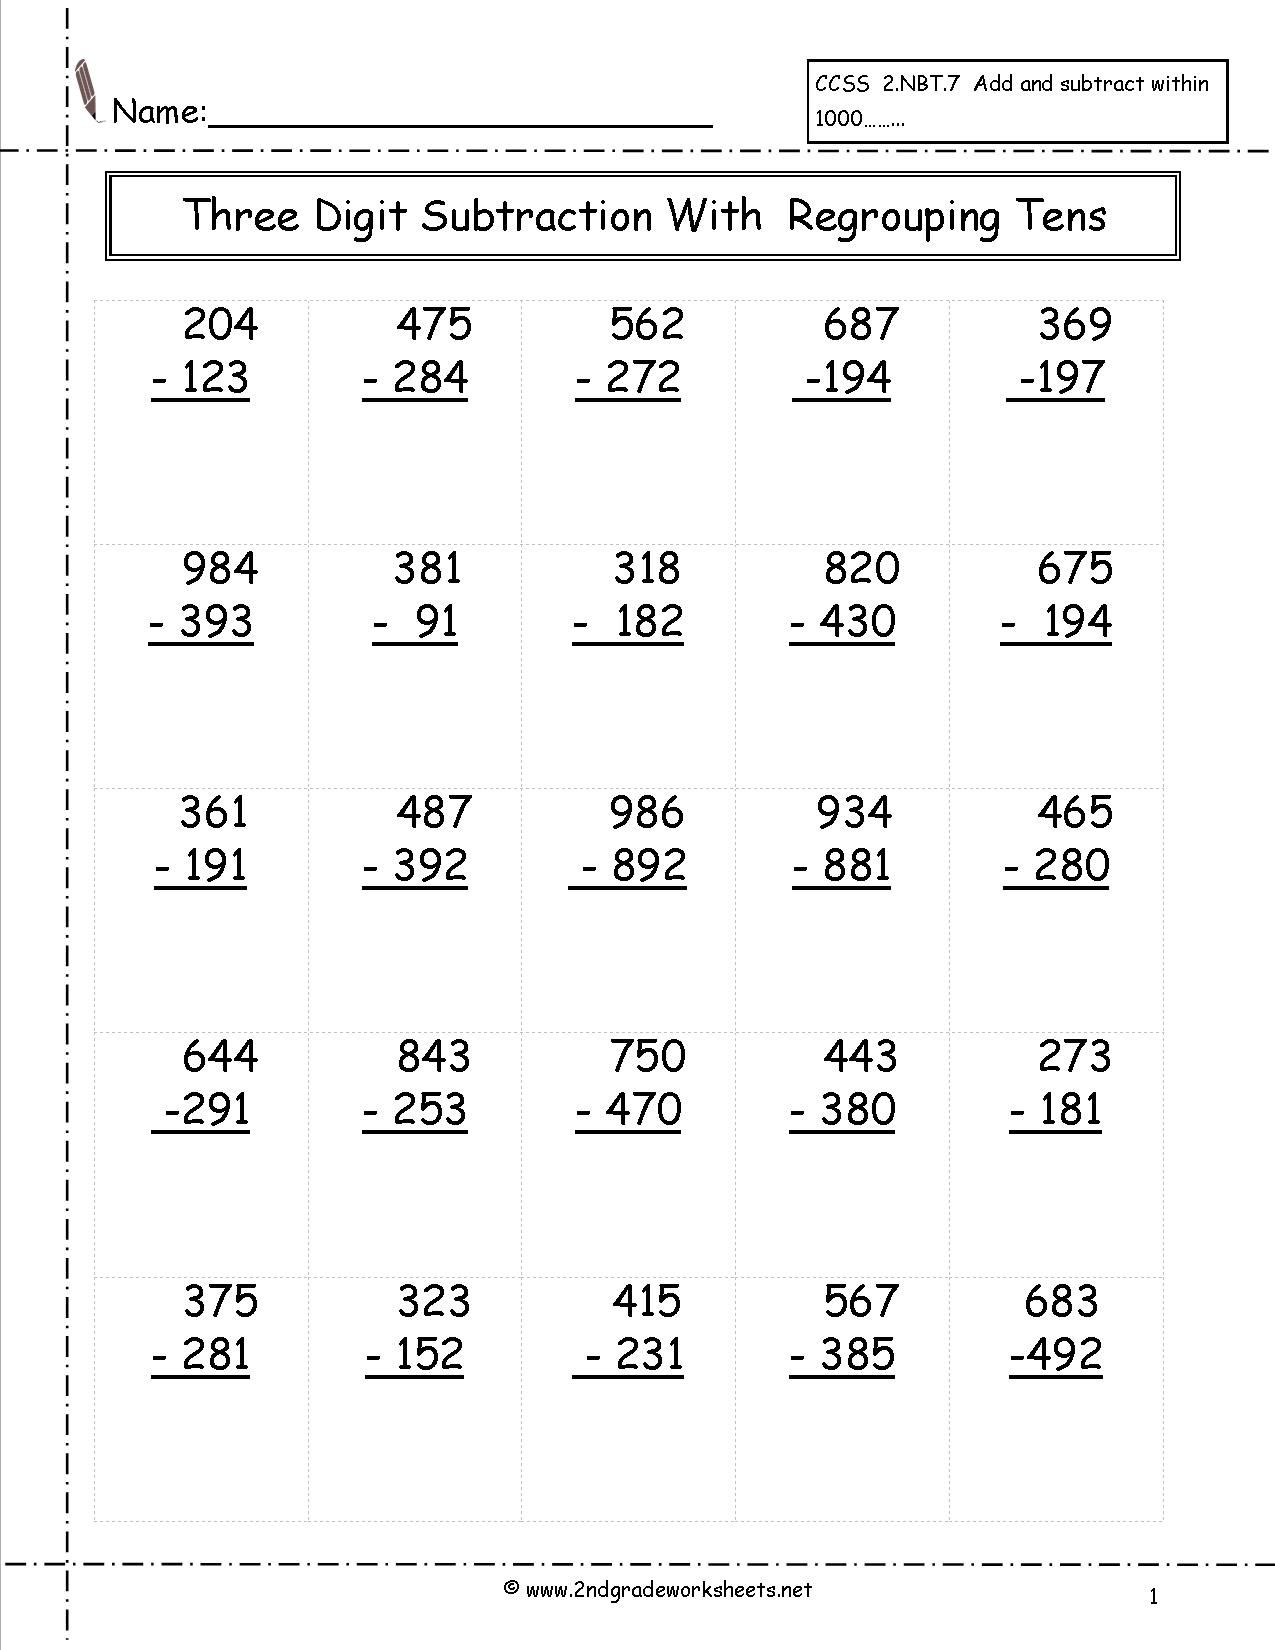 Three Digit Subtraction With Regrouping Worksheet | Learning | 3Rd Grade Math Subtraction Printable Worksheets